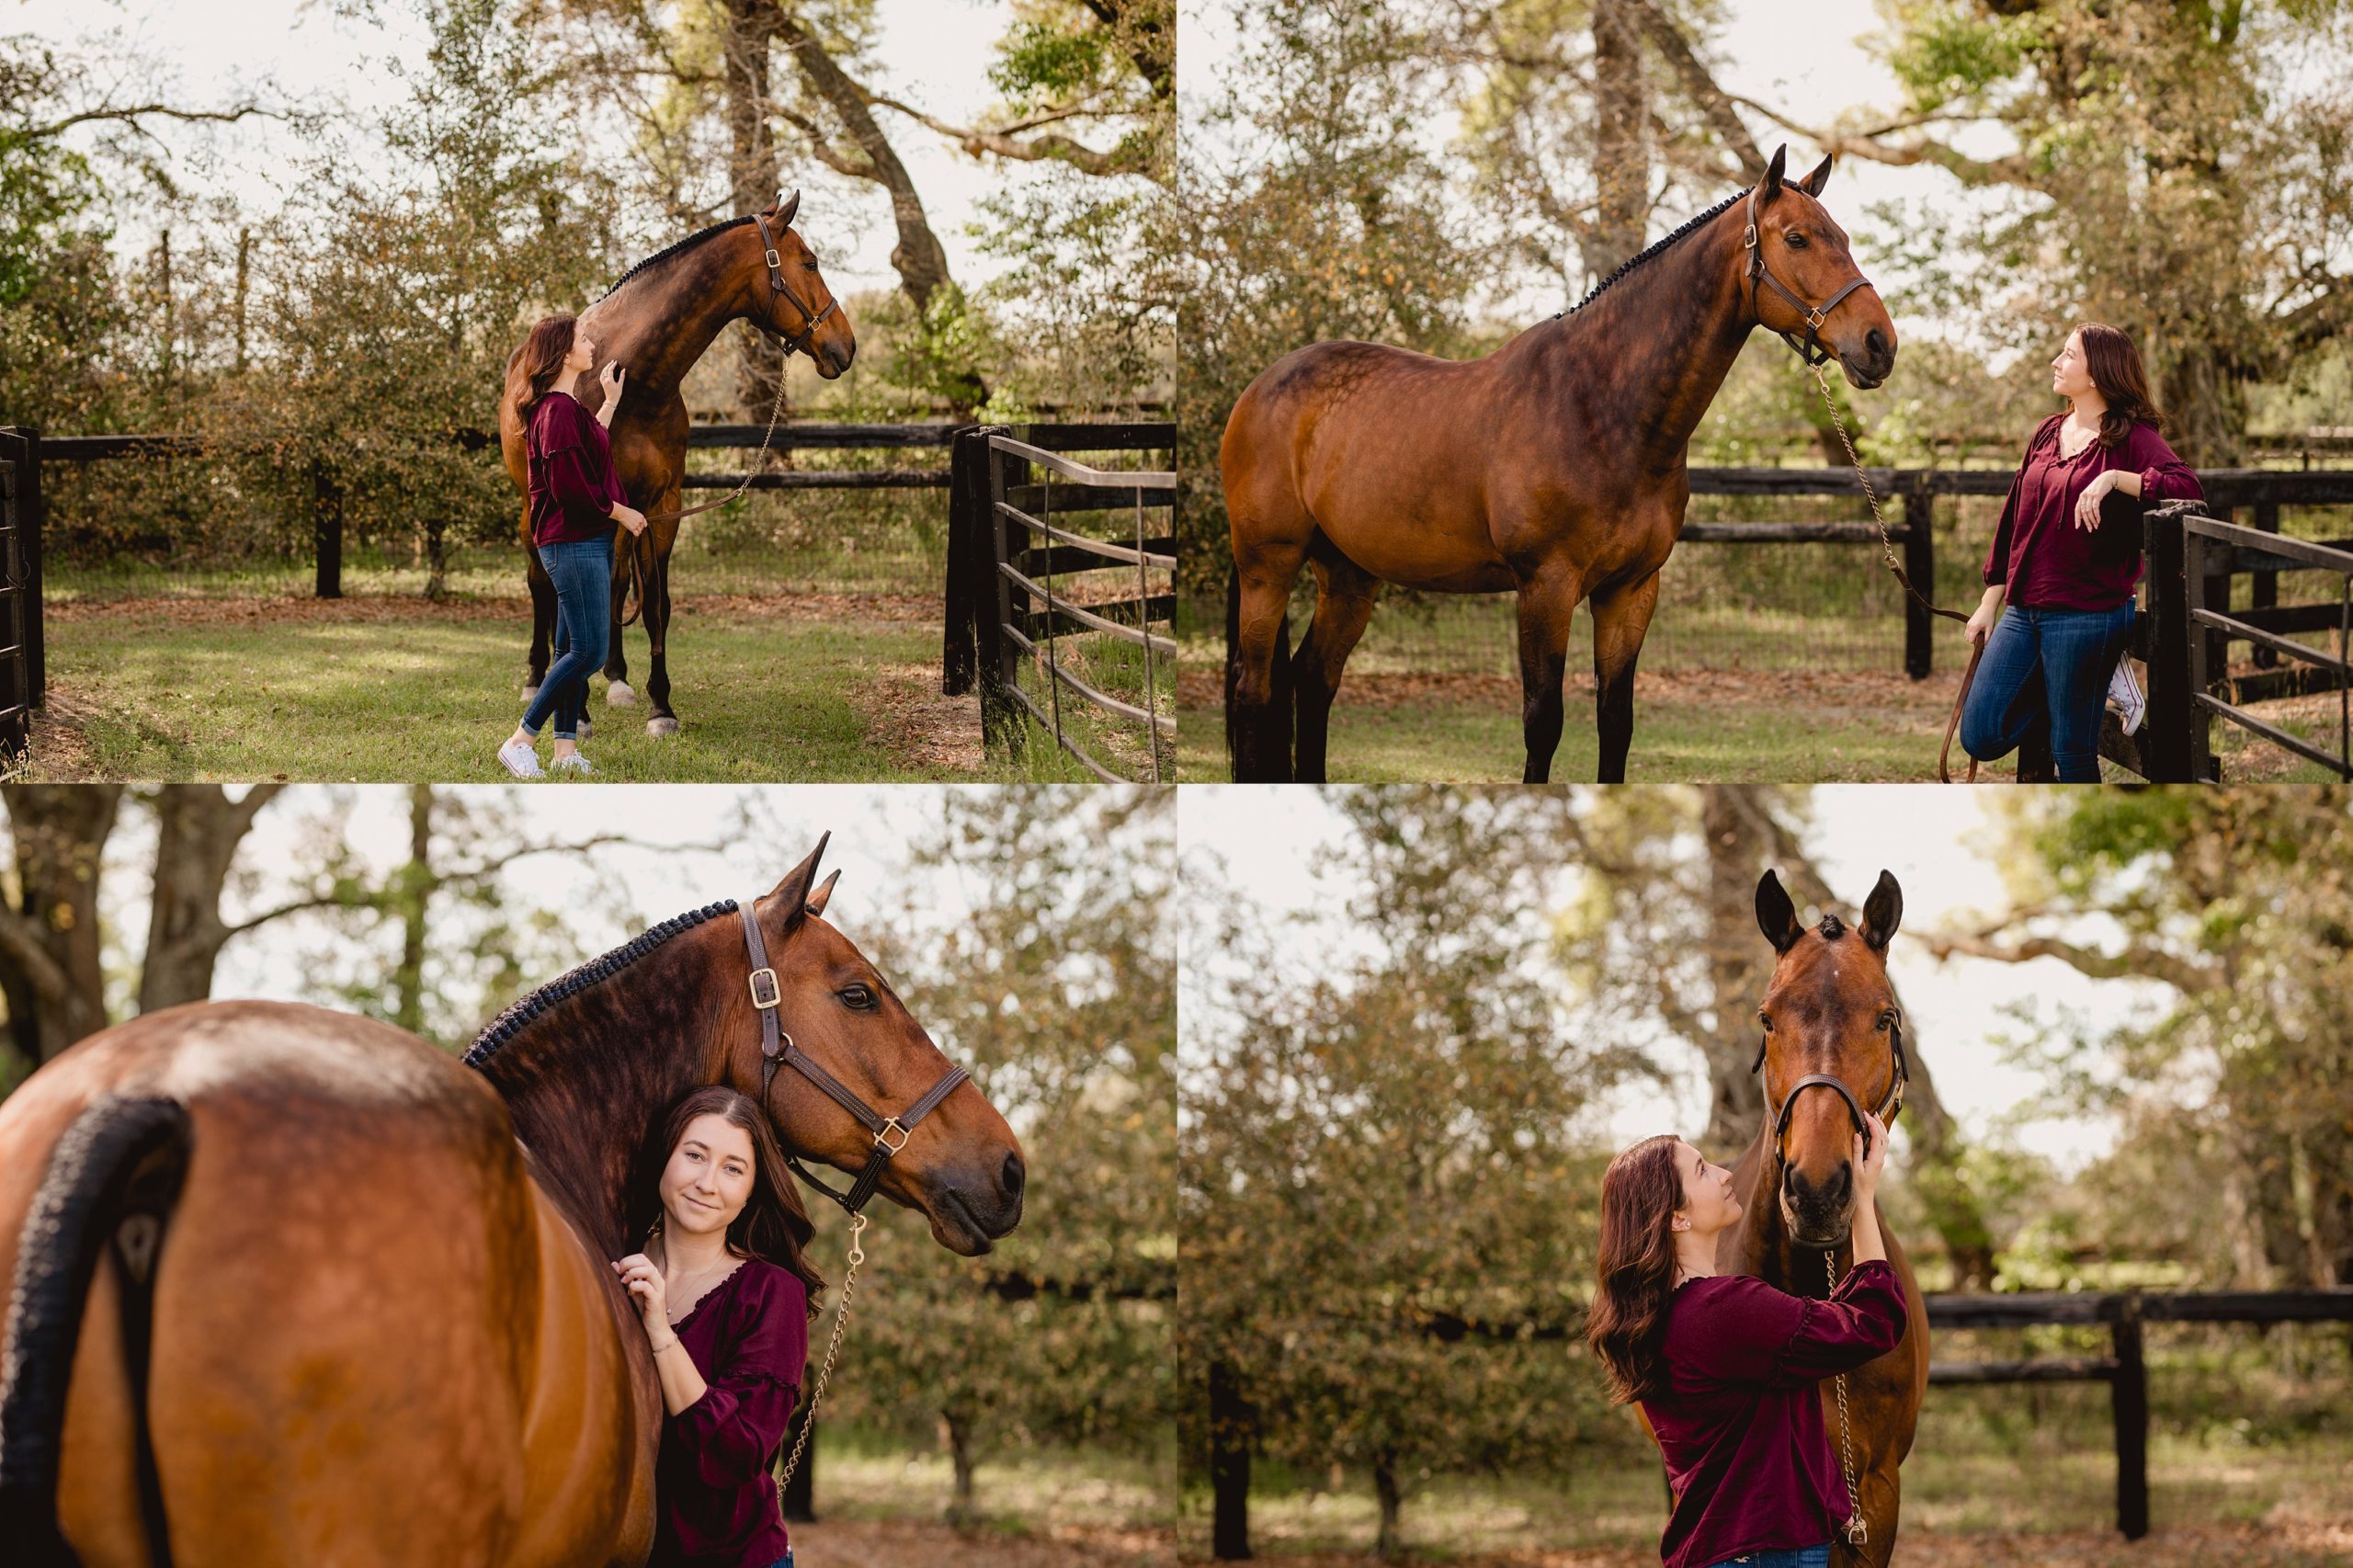 Horse and rider portrait session at HITS Ocala with Warmblood gelding and casual attire.